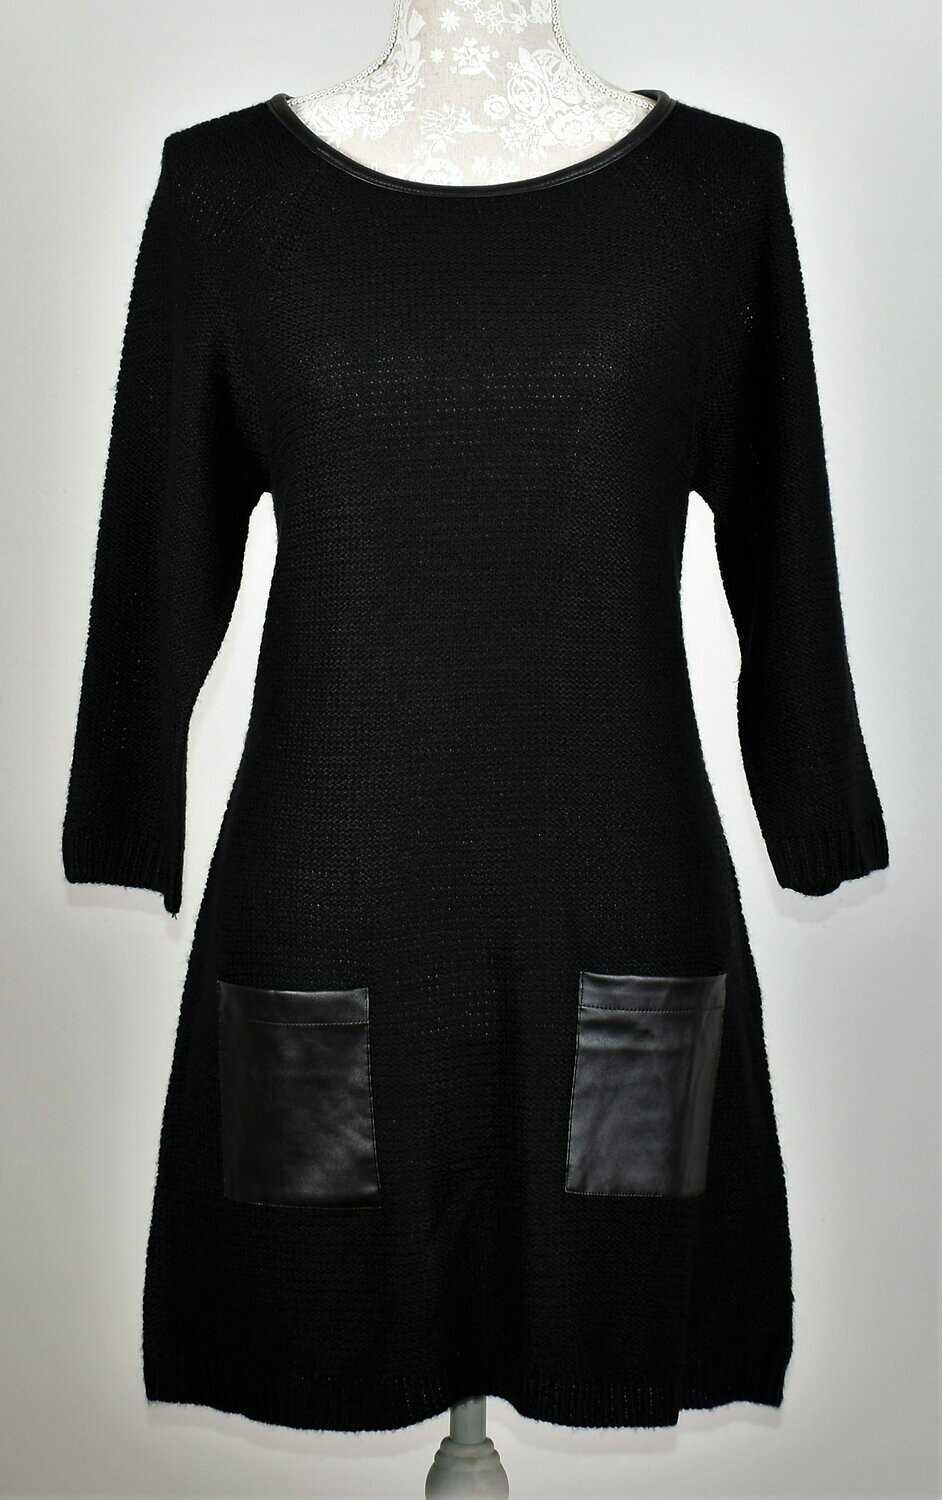 Black Knitted Shift Dress with Faux Leather Pockets & Trim by British Home Stores